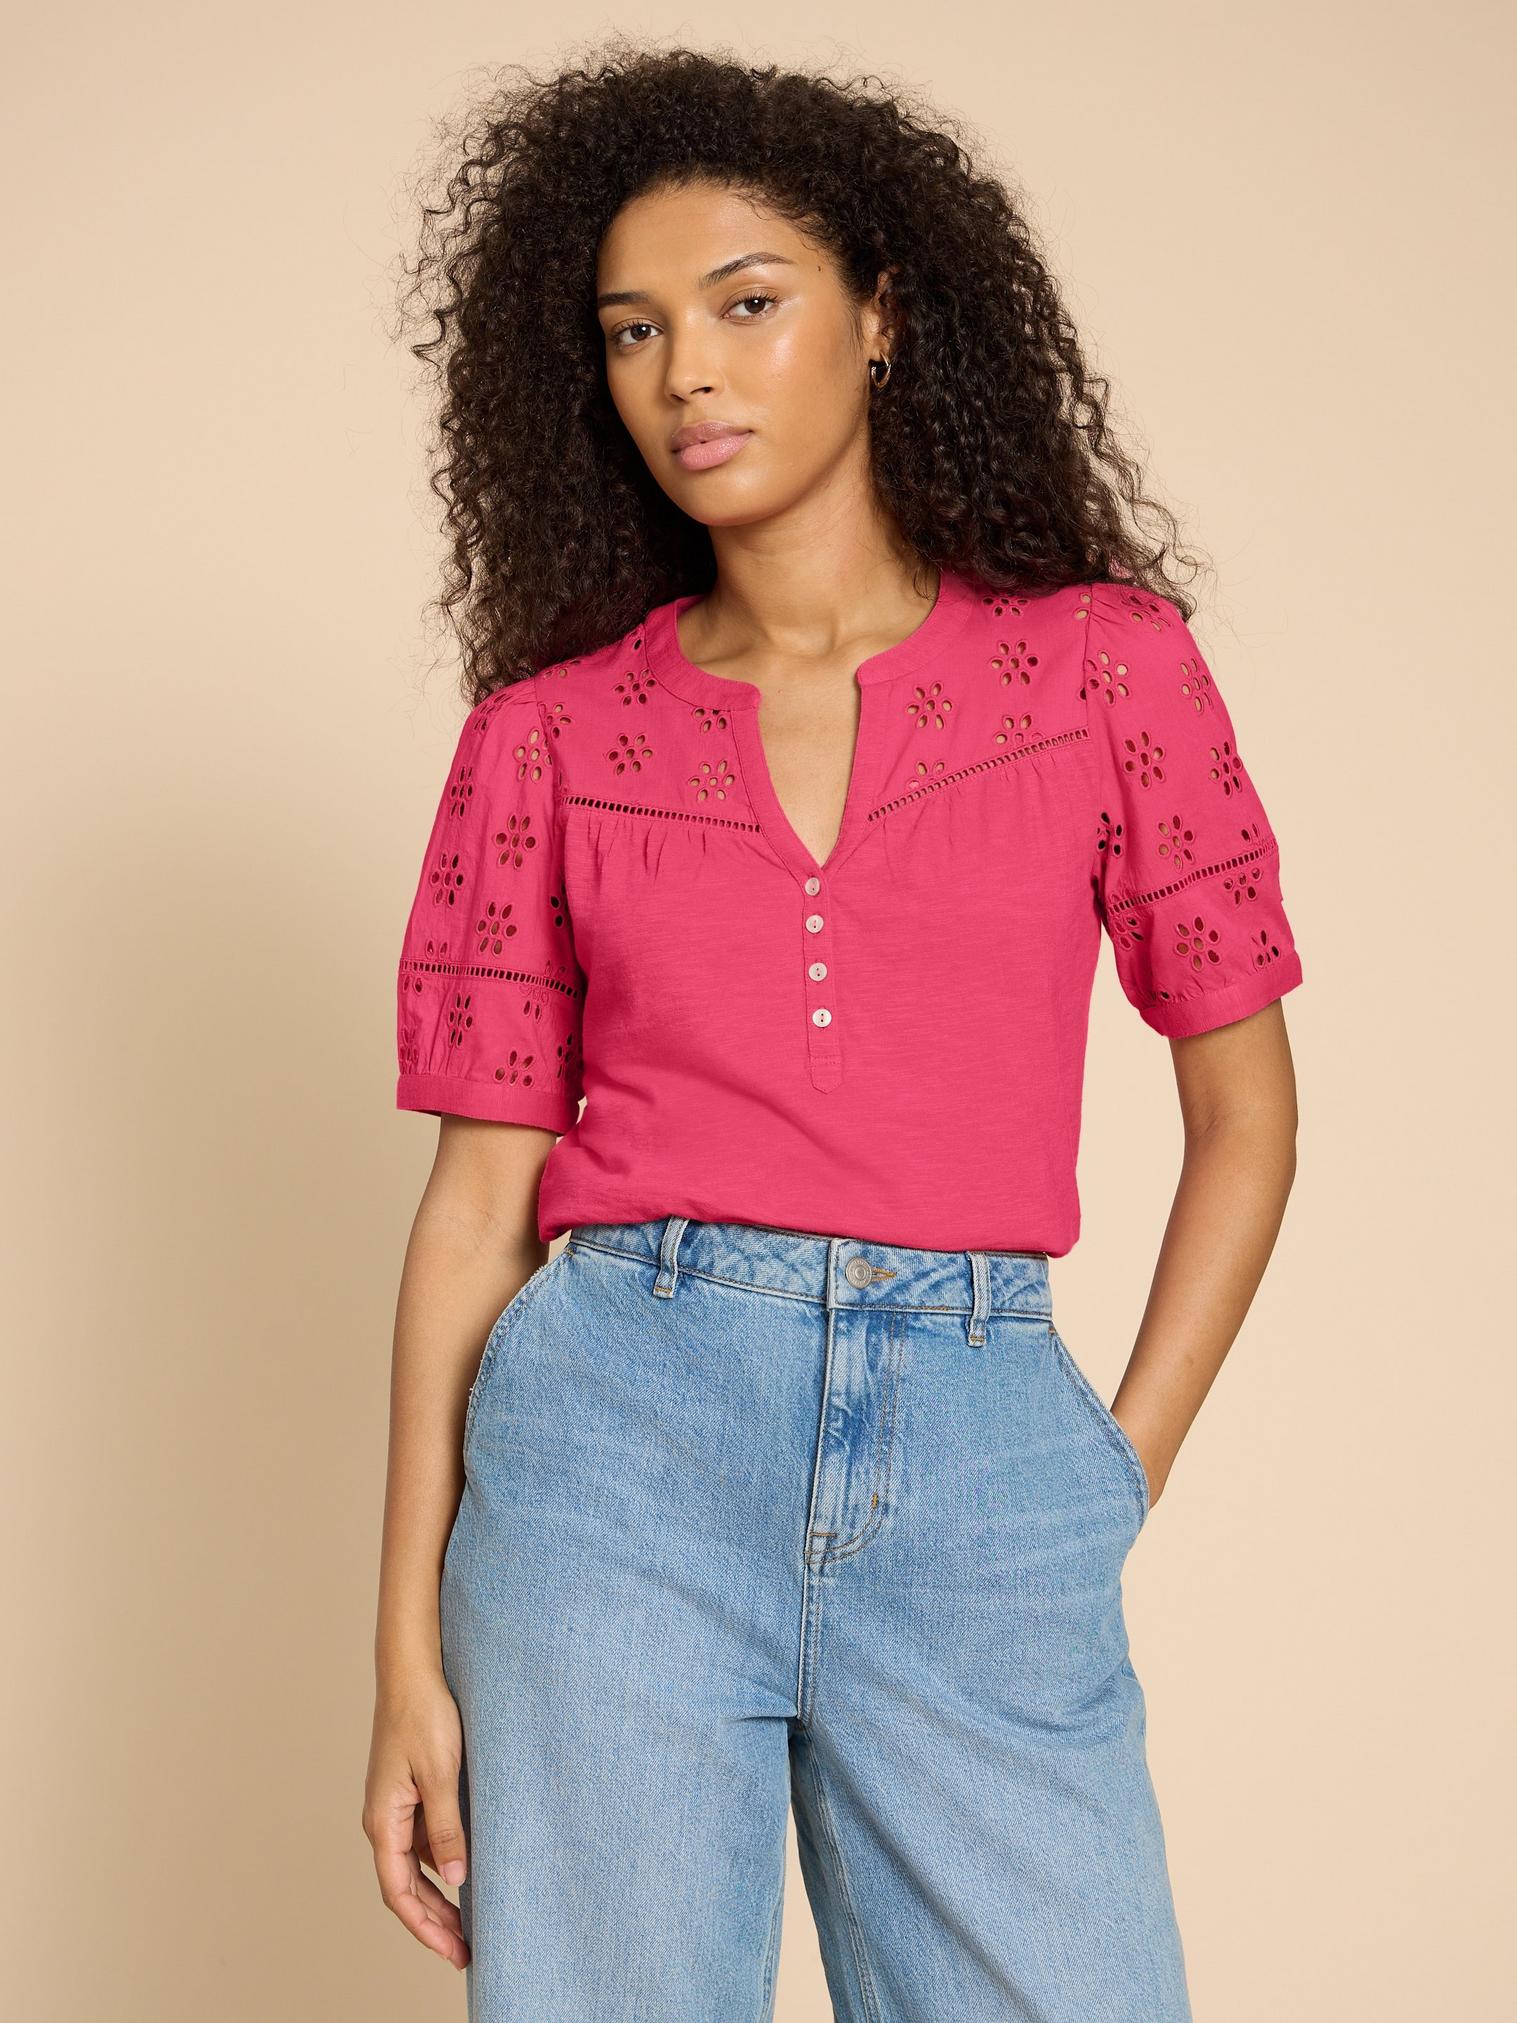 BELLA BRODERIE MIX TOP in MID PINK - LIFESTYLE